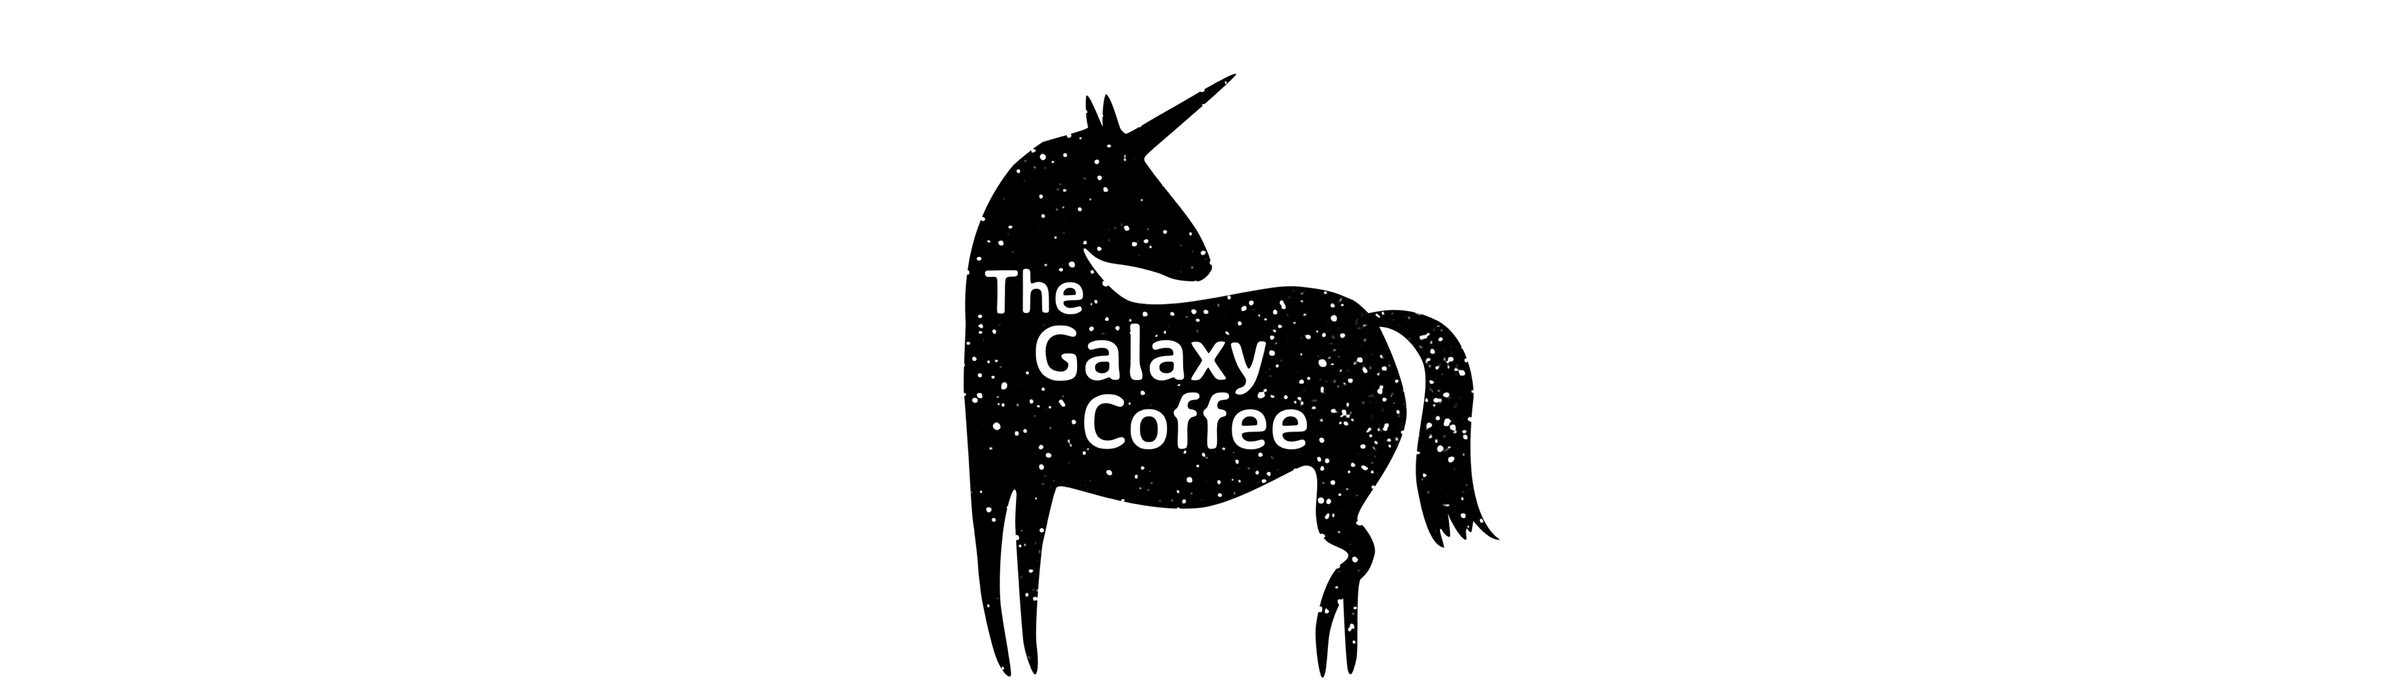 The Galaxy Coffee logo: a silhouette of a unicorn facing backwards, black with white stars, and the words "The Galaxy Coffee" written across the body.